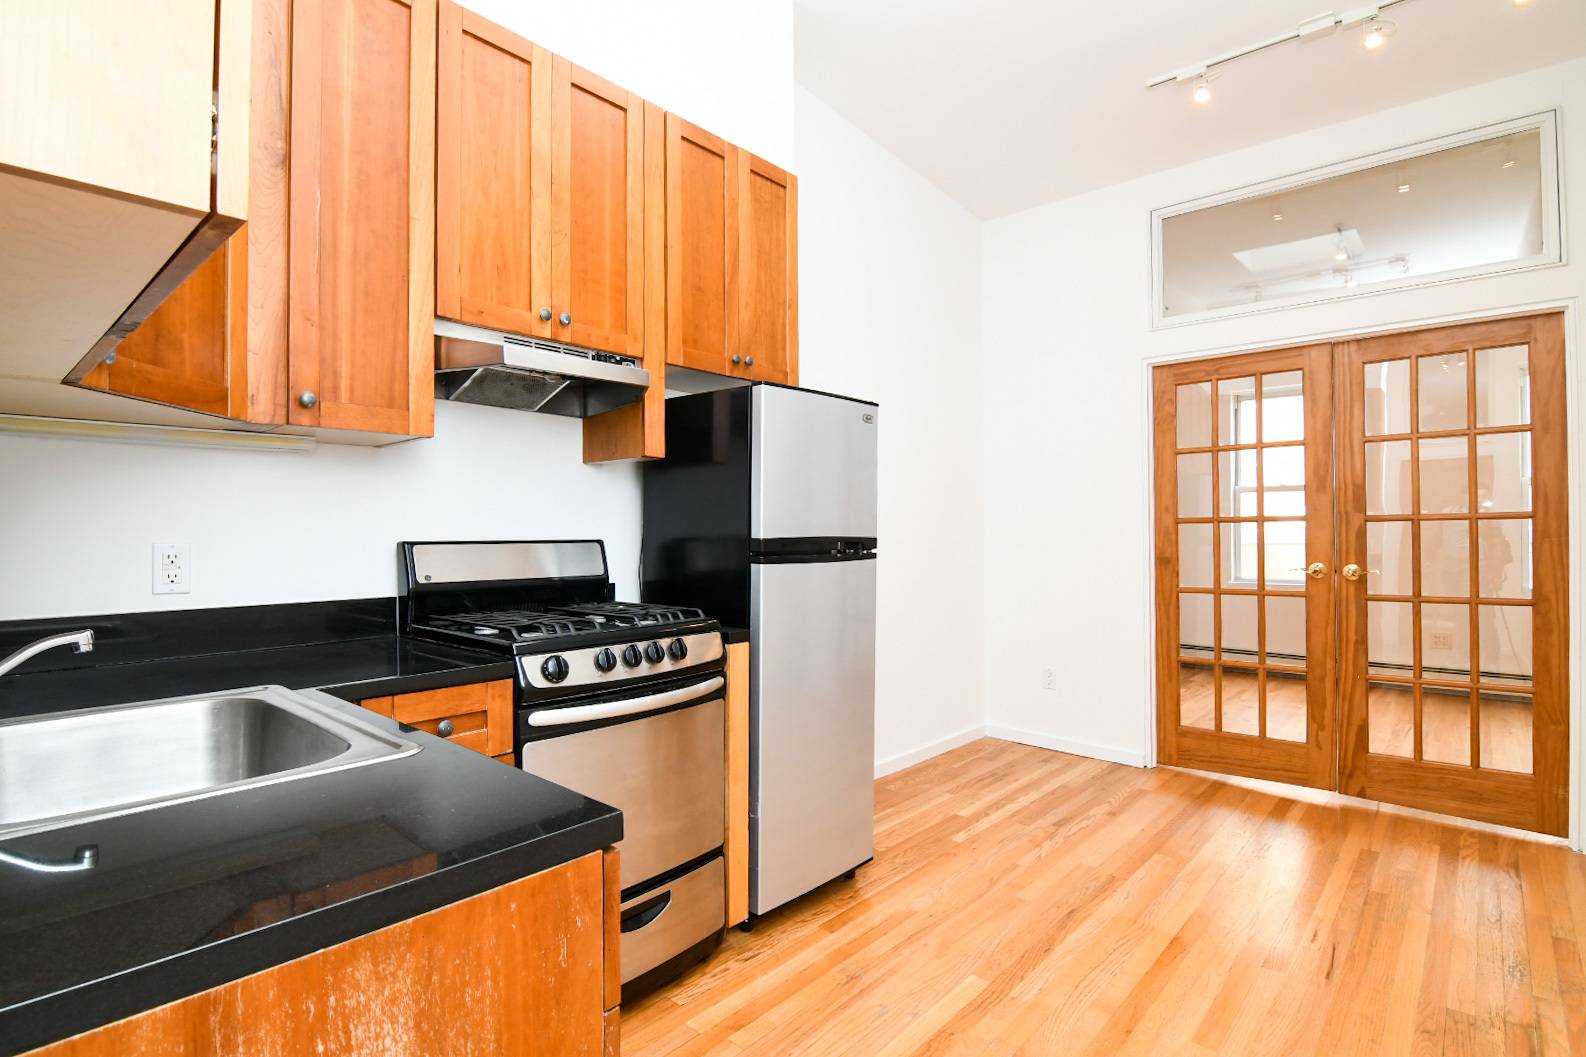 This spacious apartment features recessed lighting, tall ceilings, up to date finishes, and an eat in kitchen.